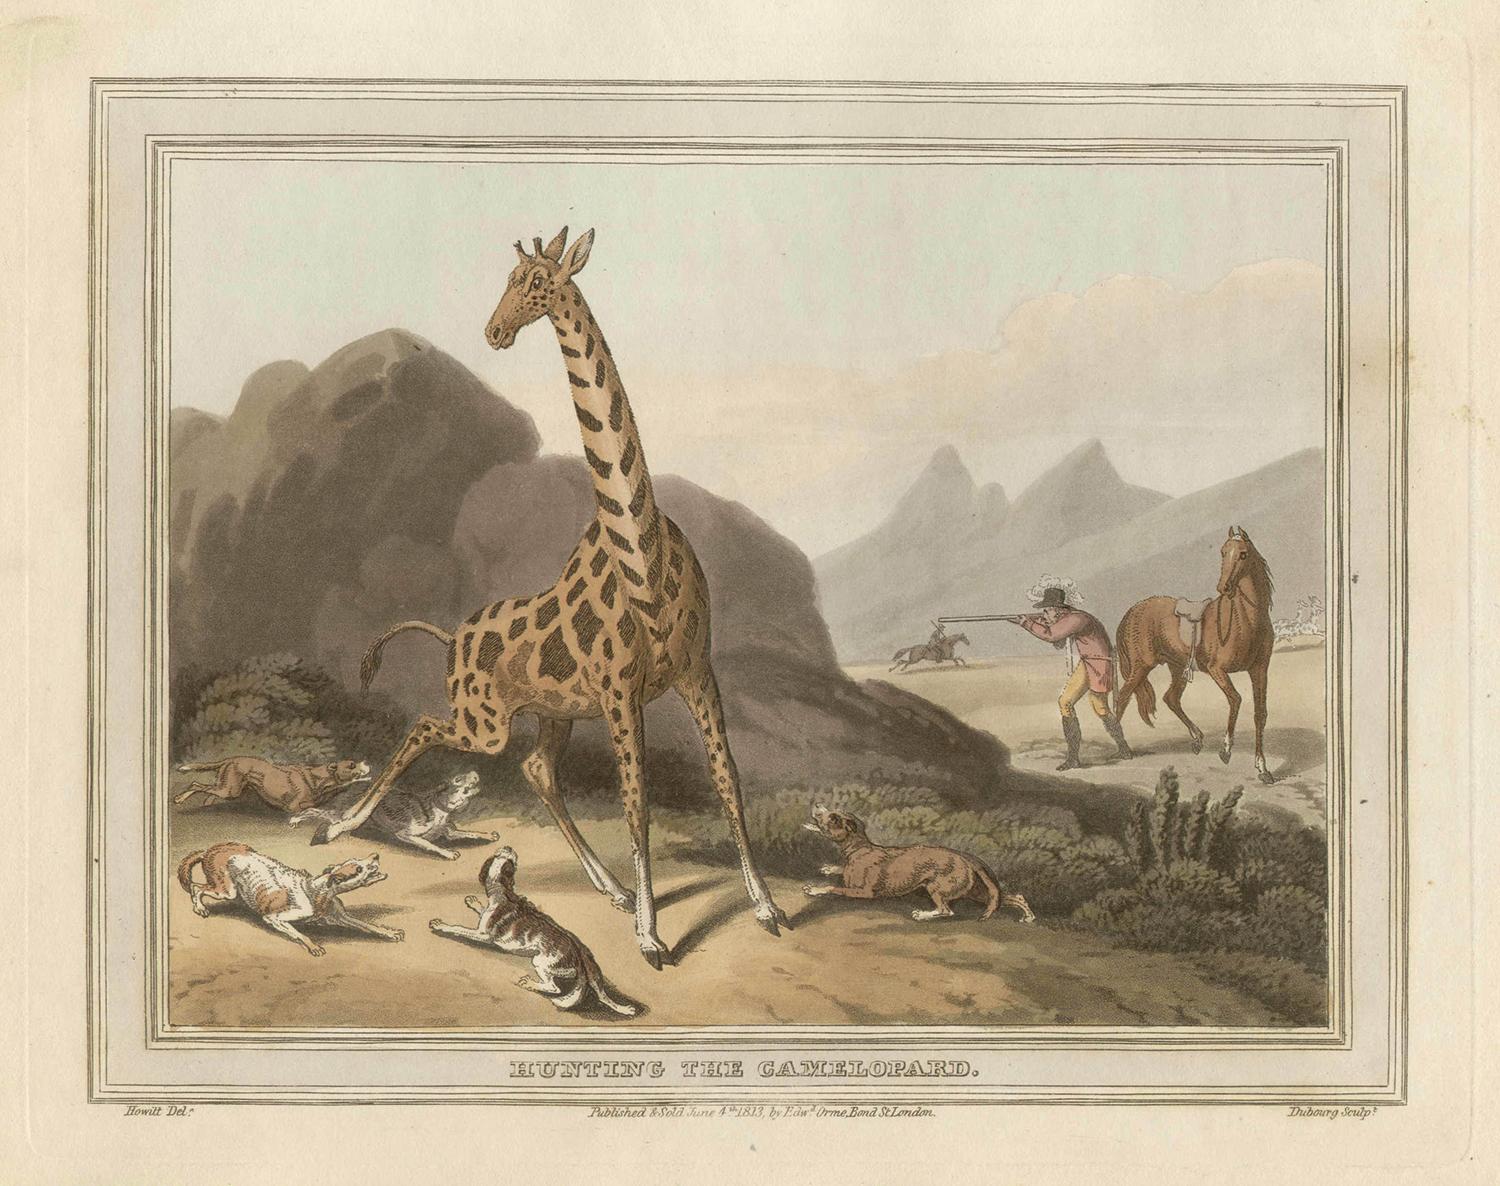 Hunting the Camelopard (Giraffe), antique African hunting engraving print, 1813